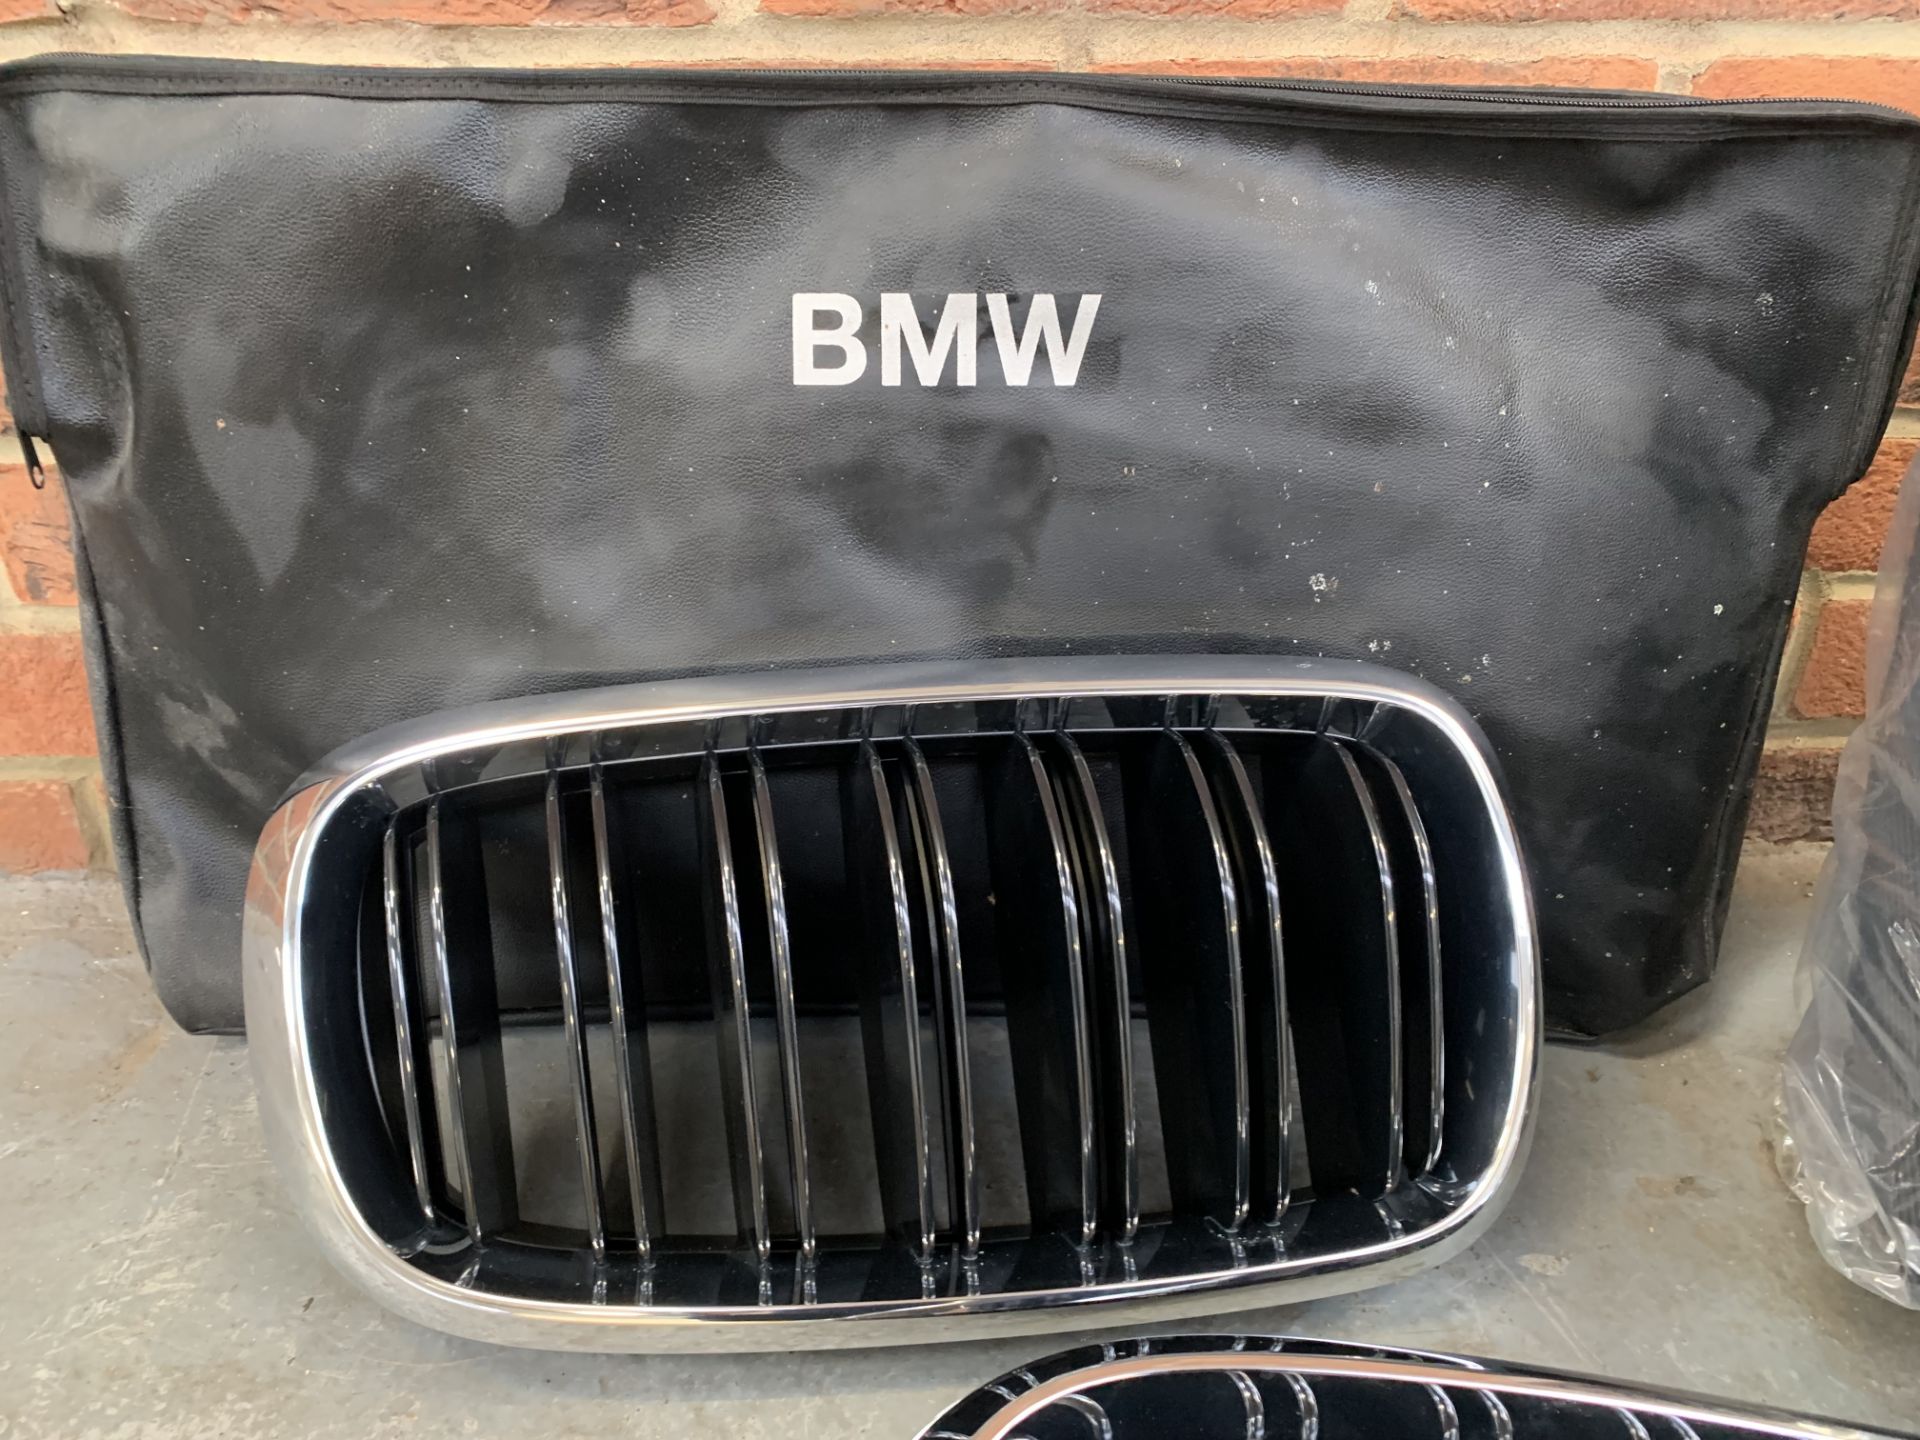 BMW Boot Cover, Two Grilles (X5M) & Portable Cool Box (New Old Stock) - Image 3 of 5